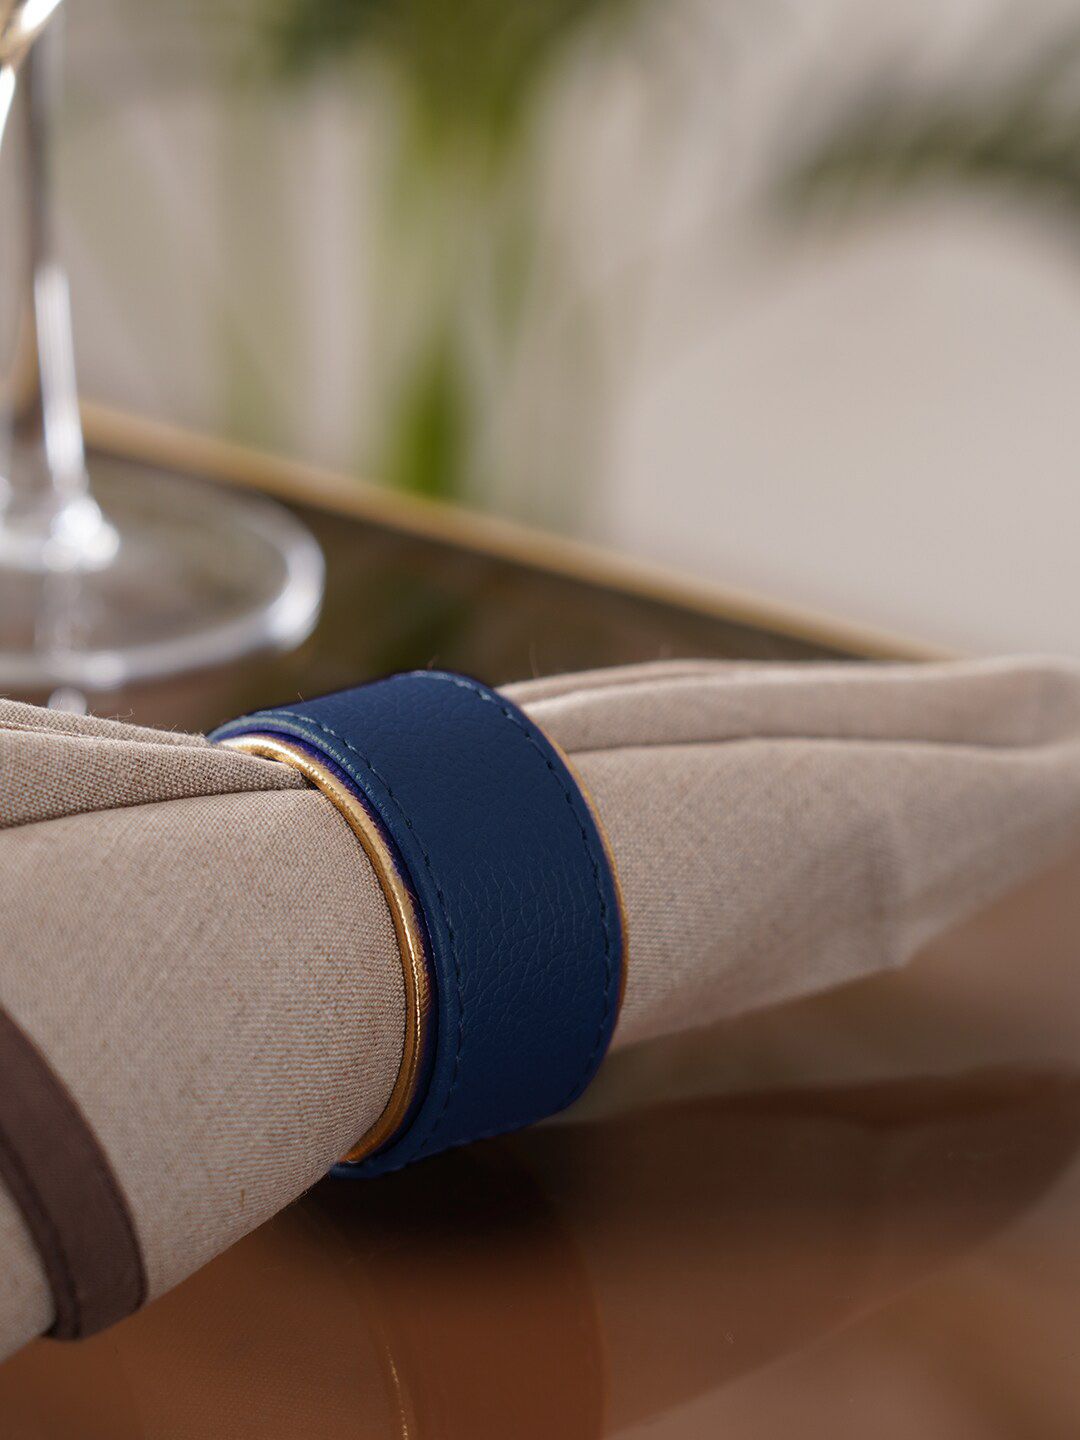 Pure Home and Living Set Of 4  Blue & Gold-Toned Solid Table Napkins Rings Price in India